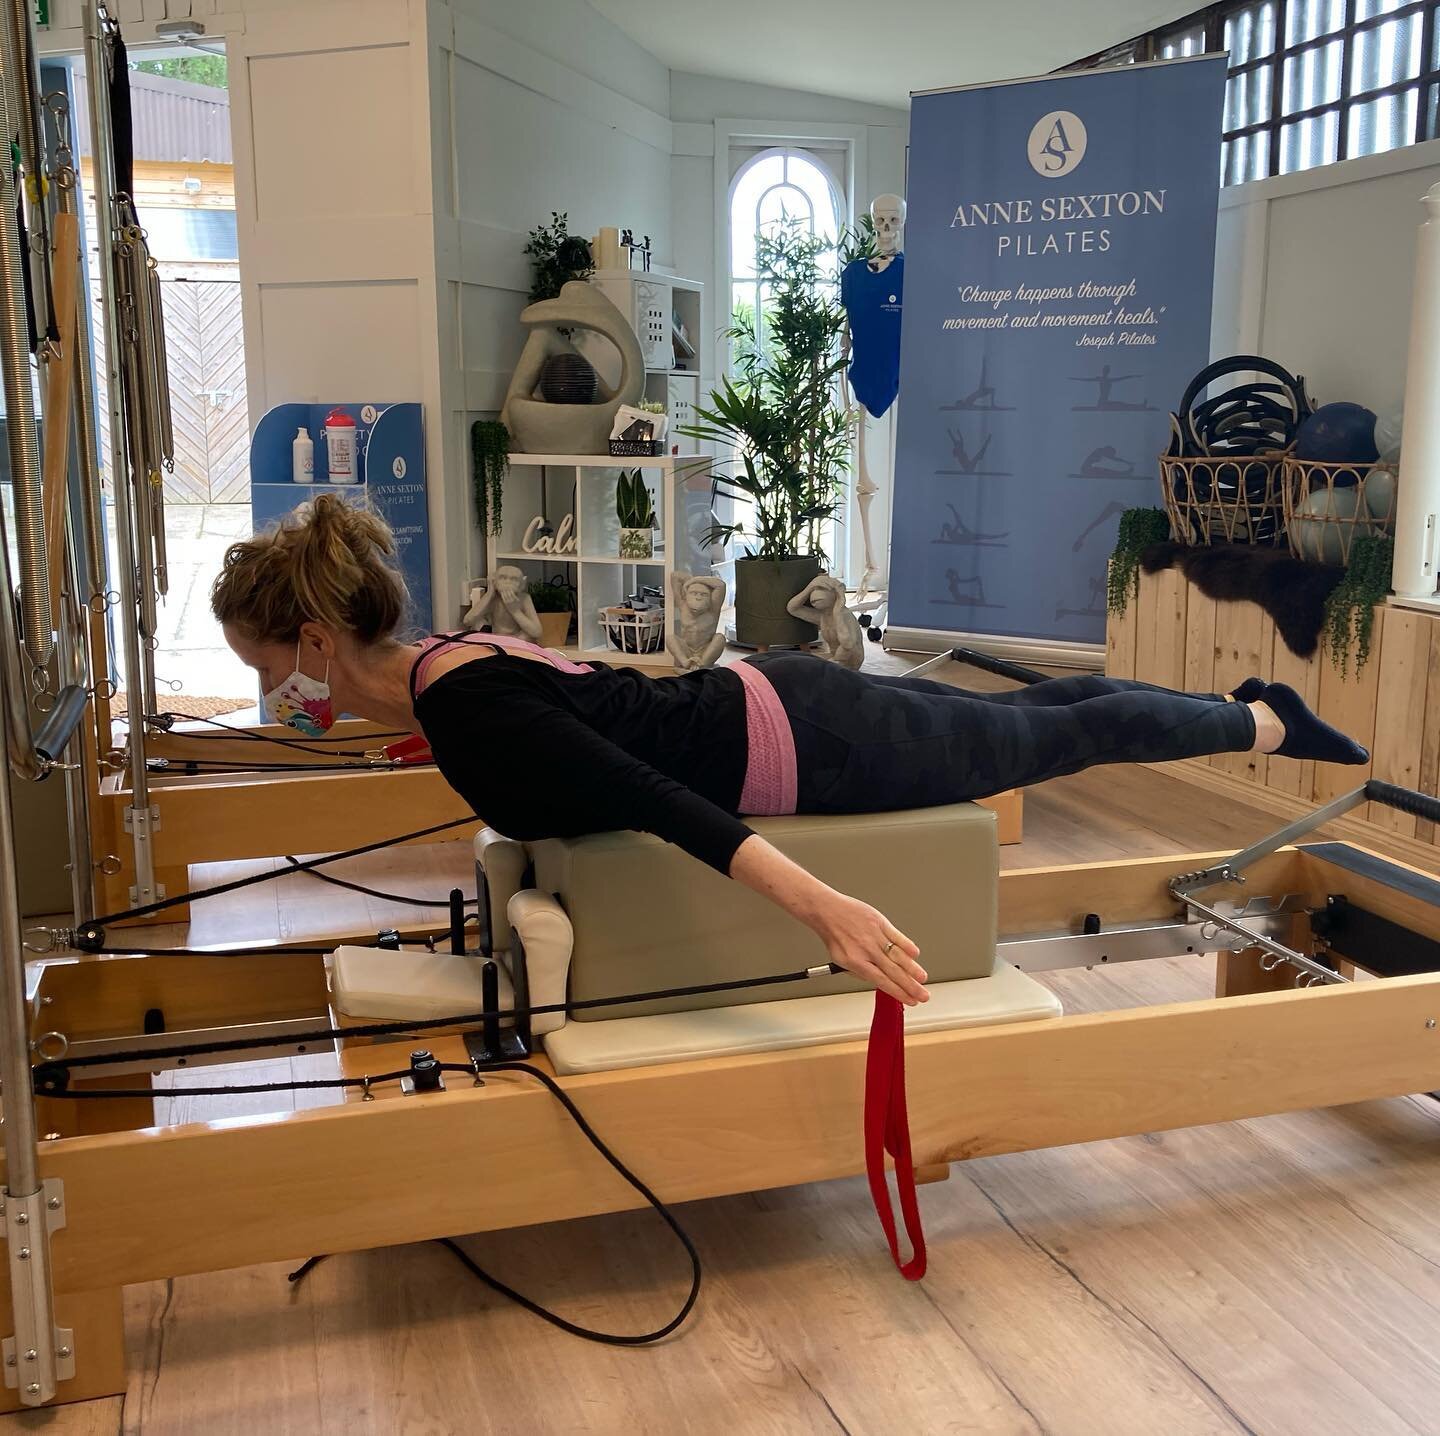 My very first Reformer Pilates class!!!

Thanks so much to Lynn @annesextonpilates who gently took me into her class this morning.

And I am weak as a kitten but she encouraged me and supported me in that and I really appreciated it!

The beautiful n